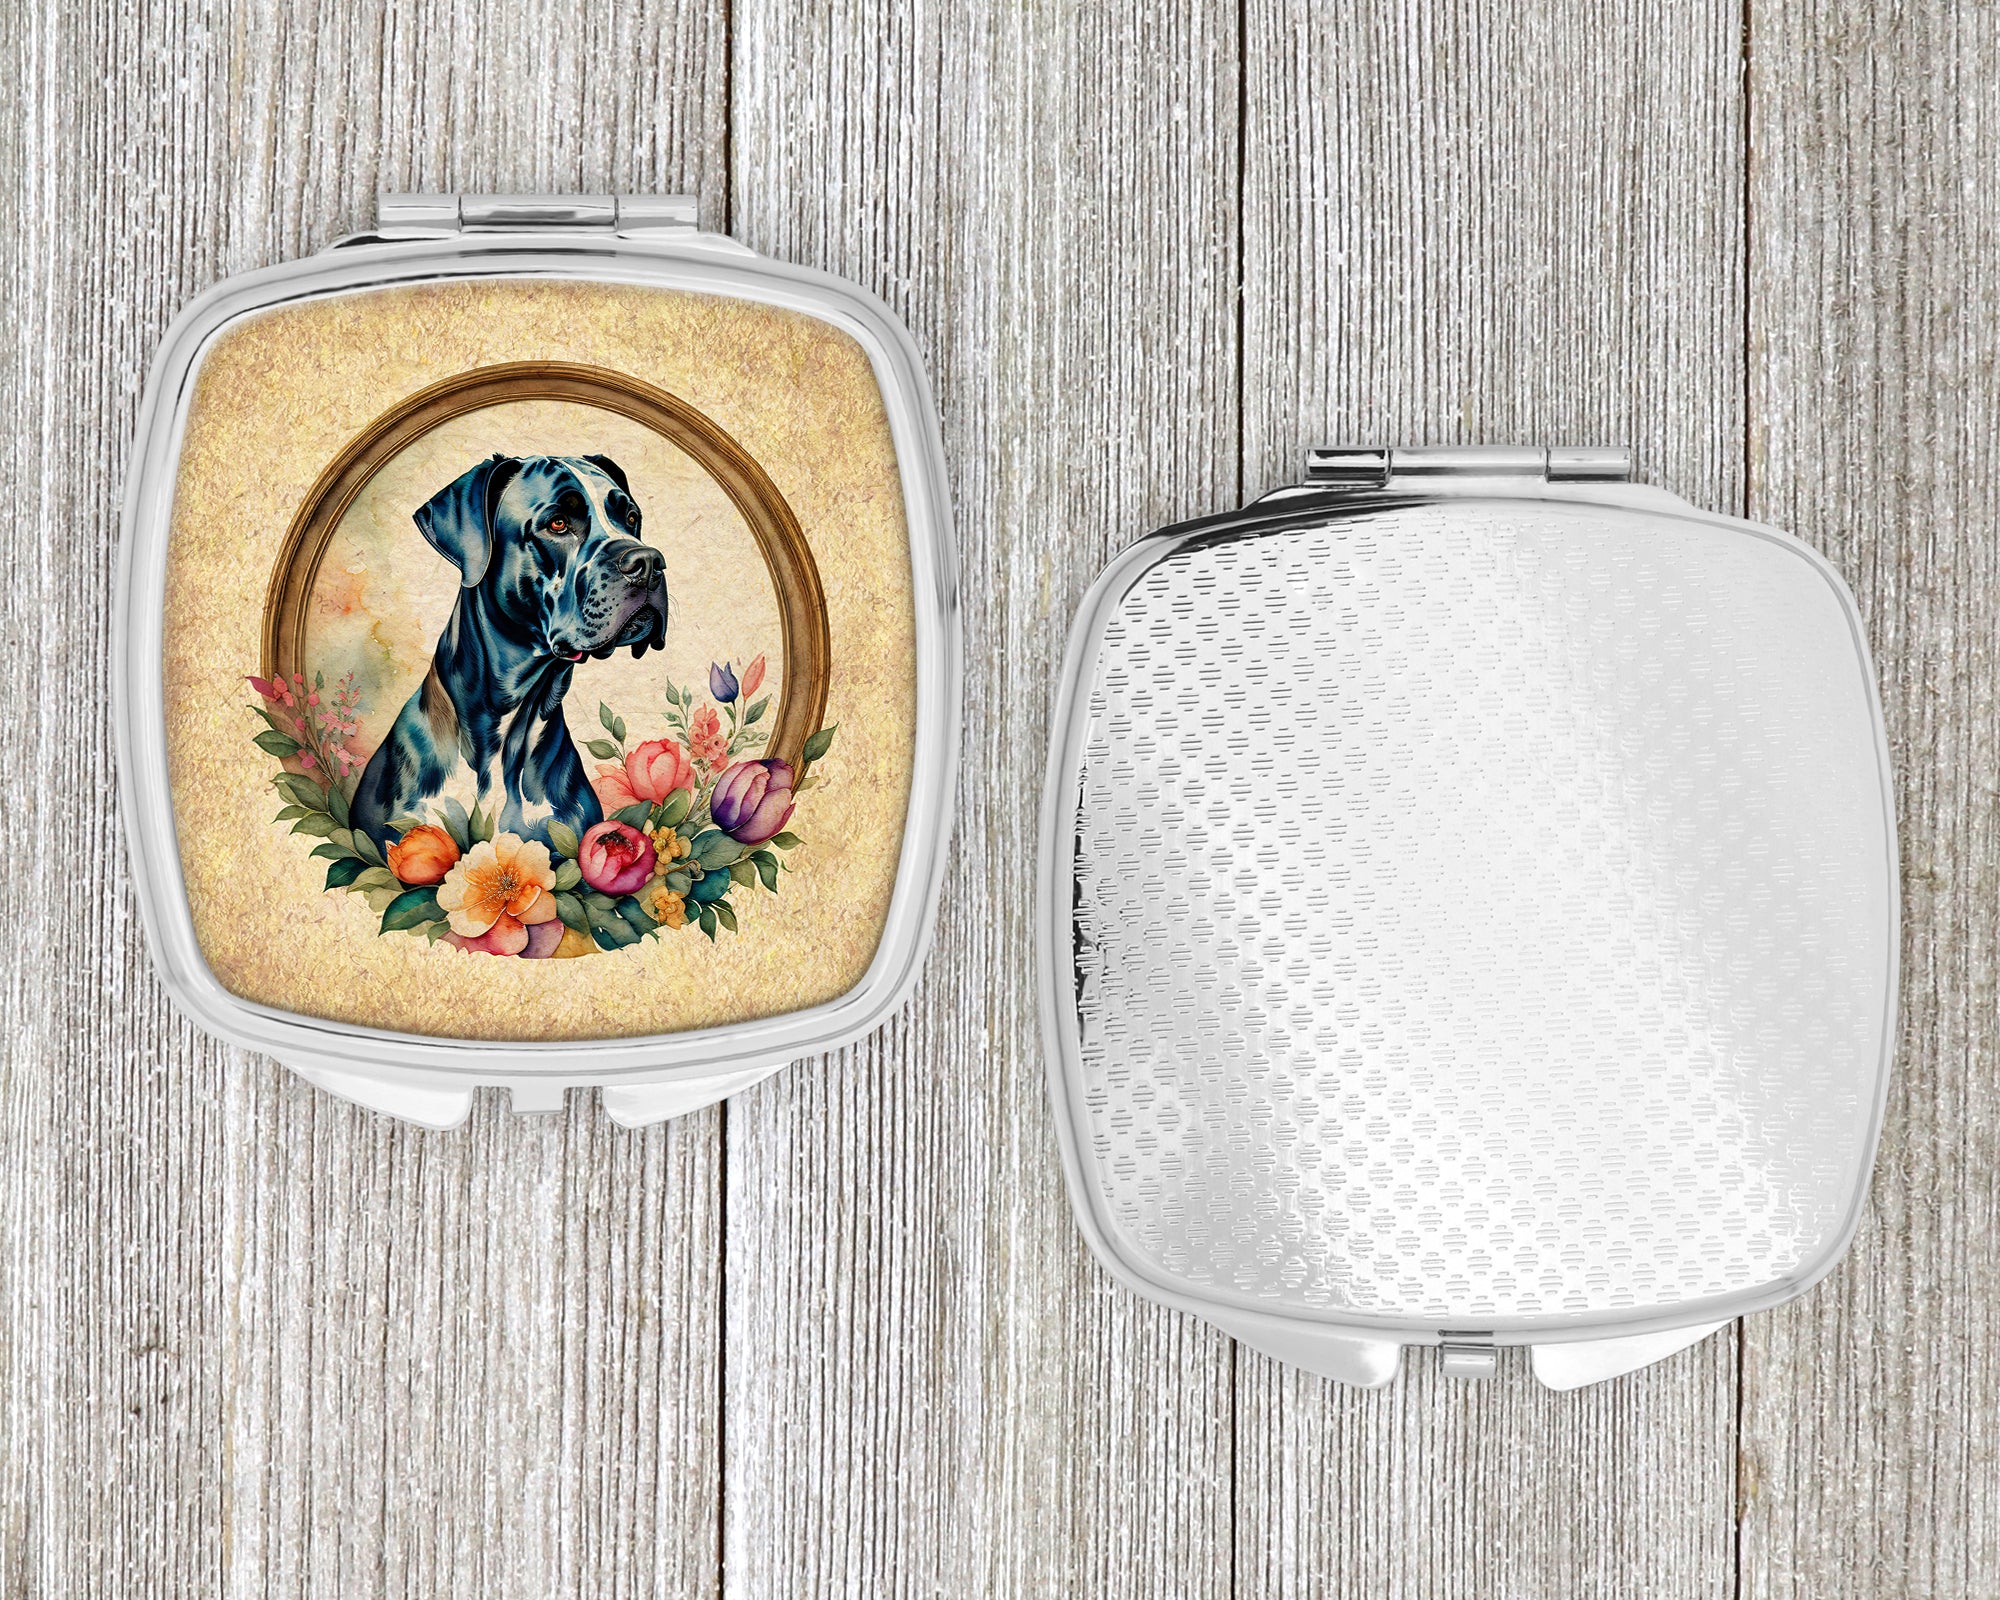 Great Dane and Flowers Compact Mirror